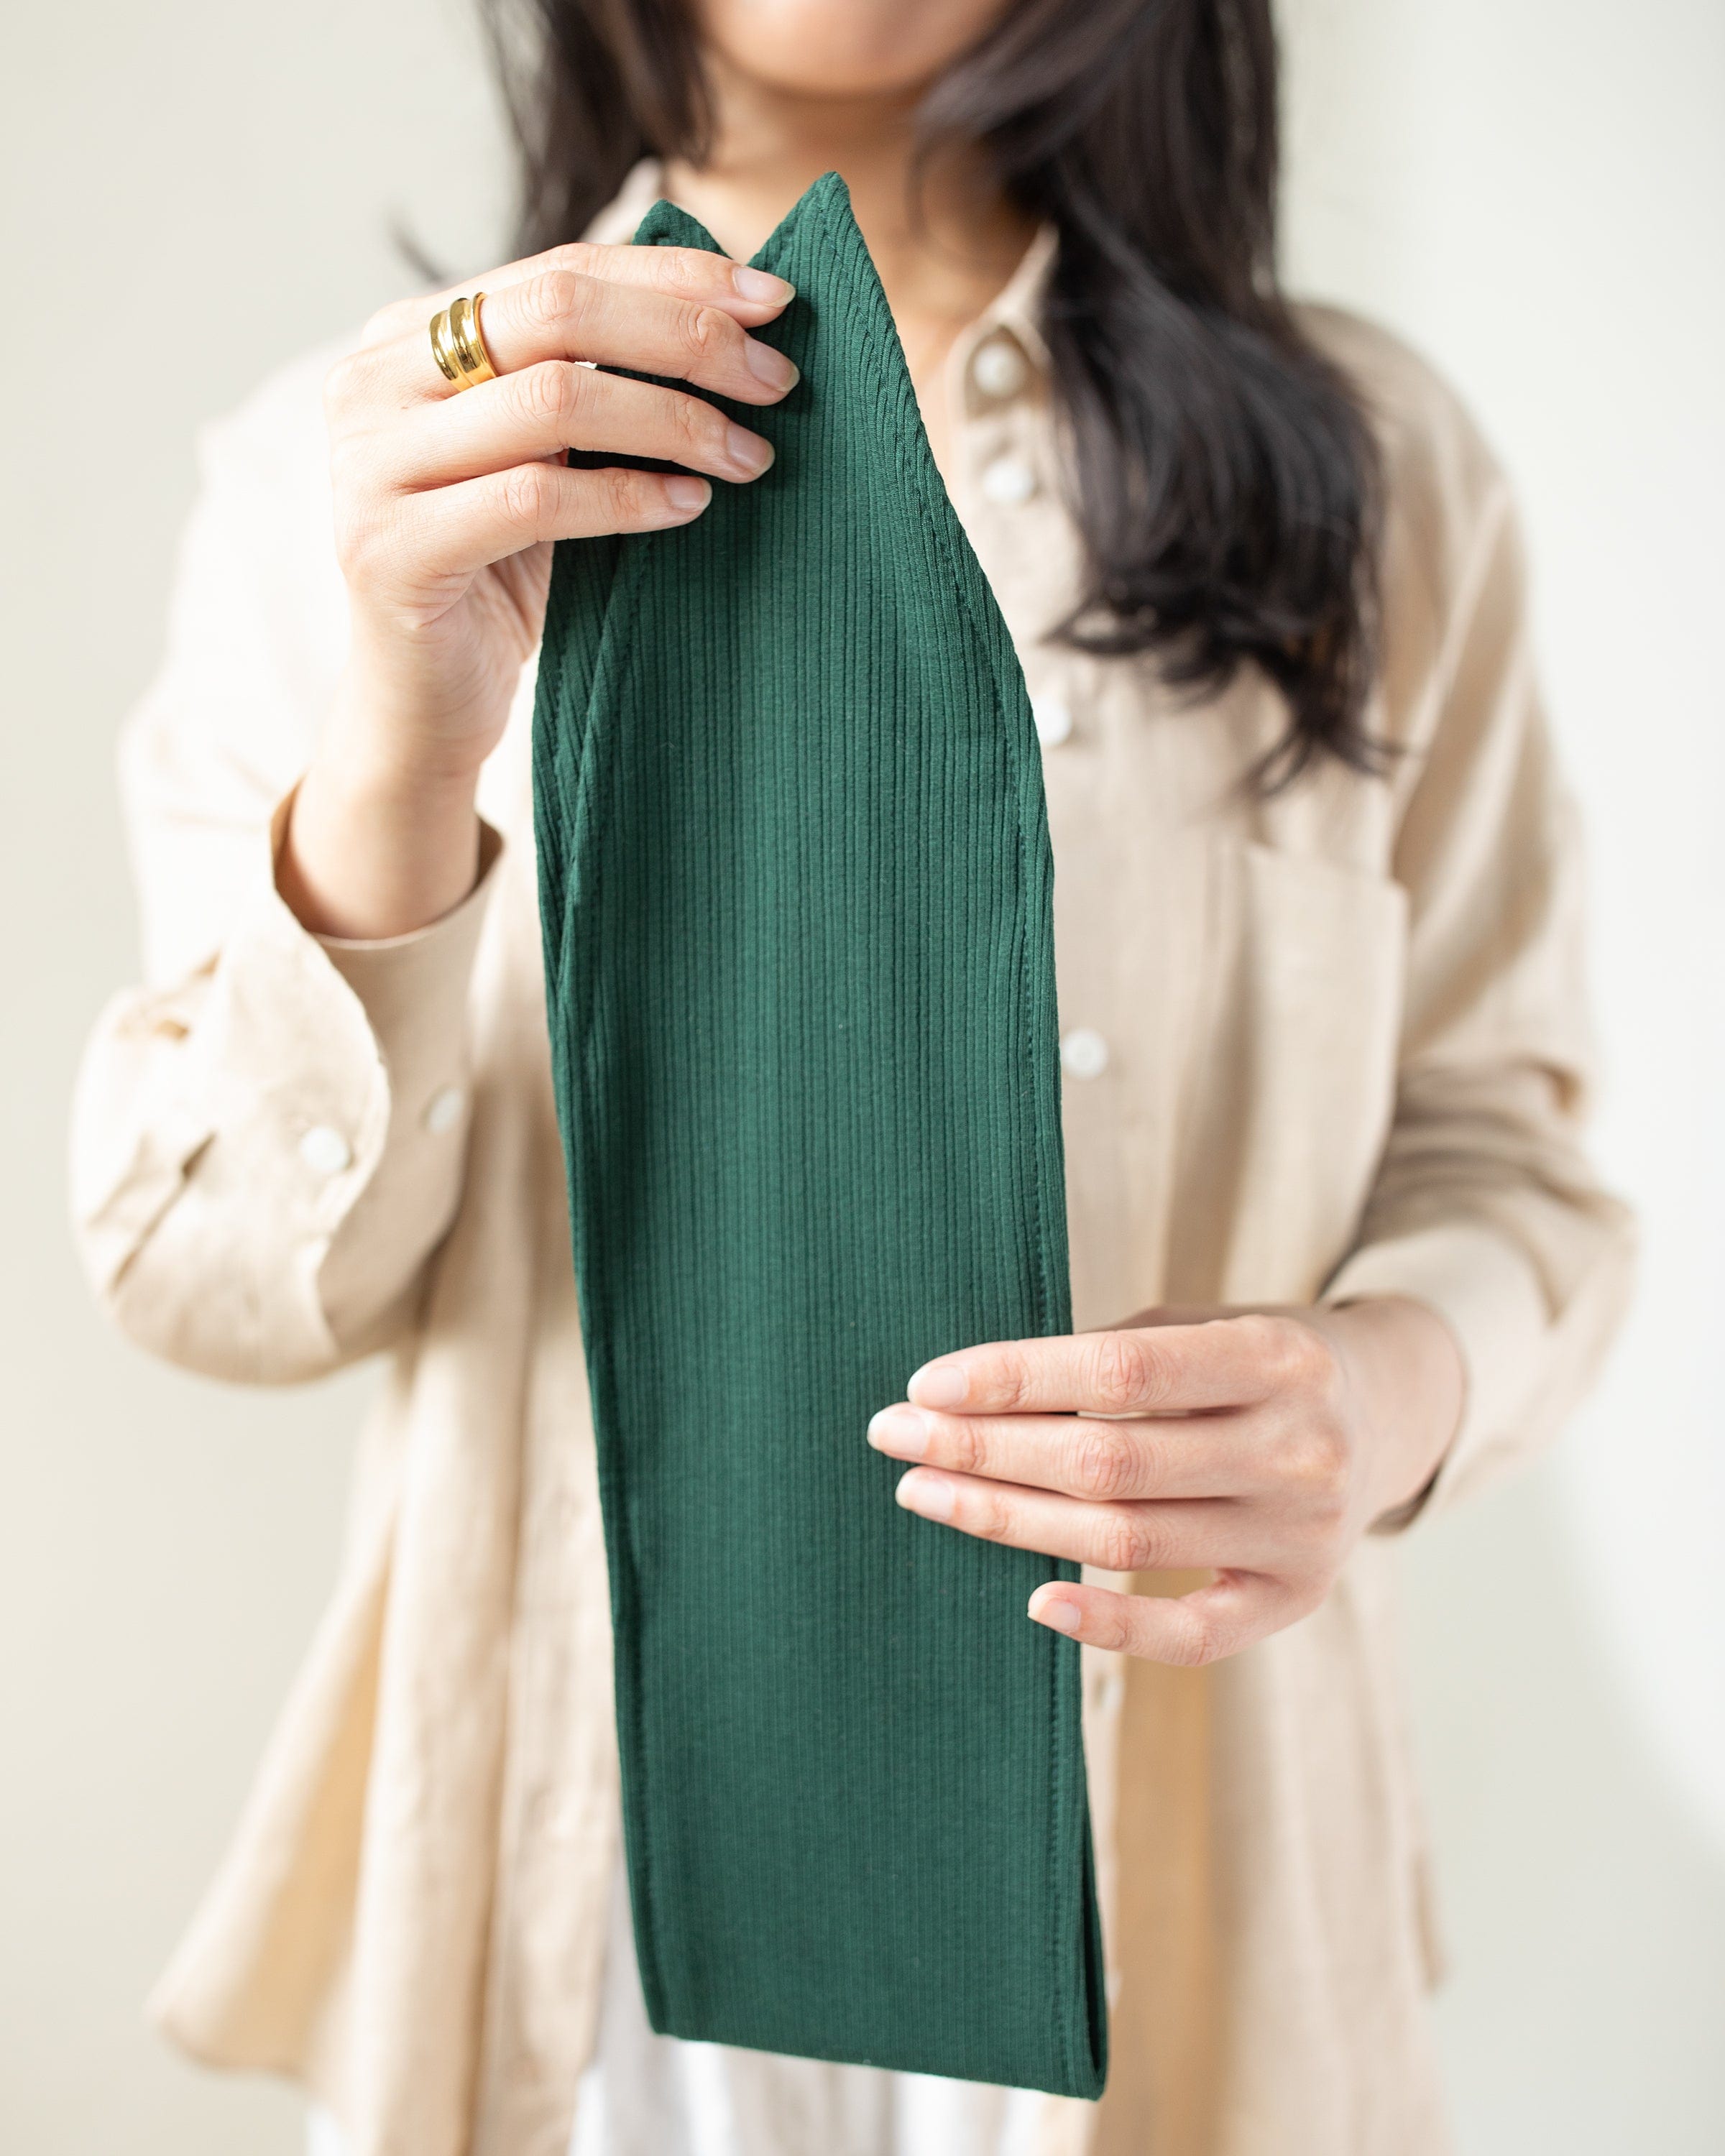 The Wrap Life Ribbed Bandie in Eden Green Bandie